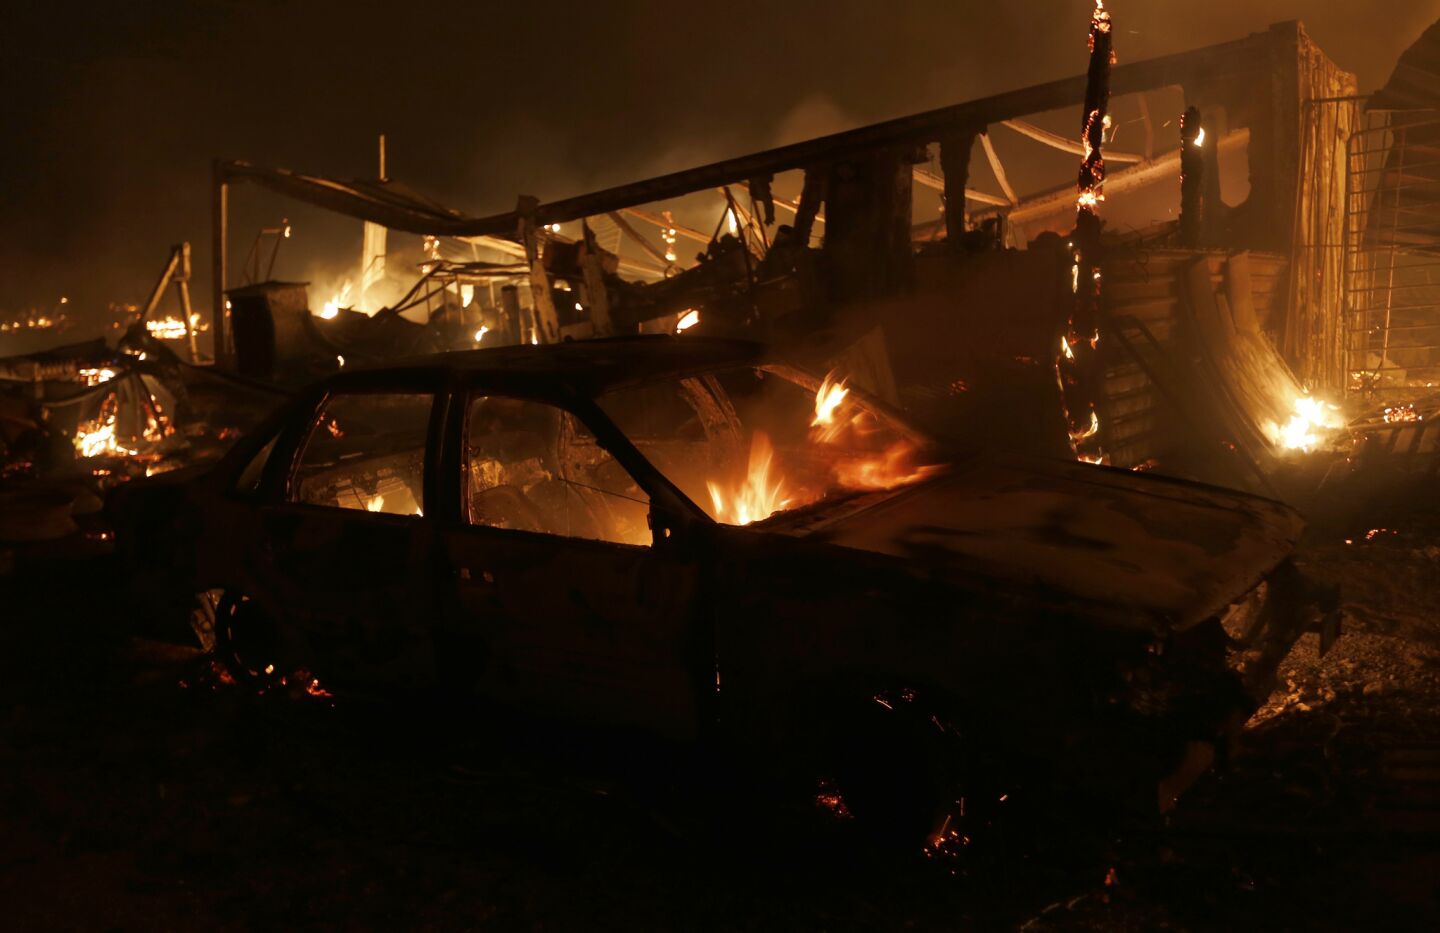 Burned homes and vehicles are left in the wake of the Blue Cut Fire that broke out in Devore near the Cajon Pass on Aug. 16, 2016.